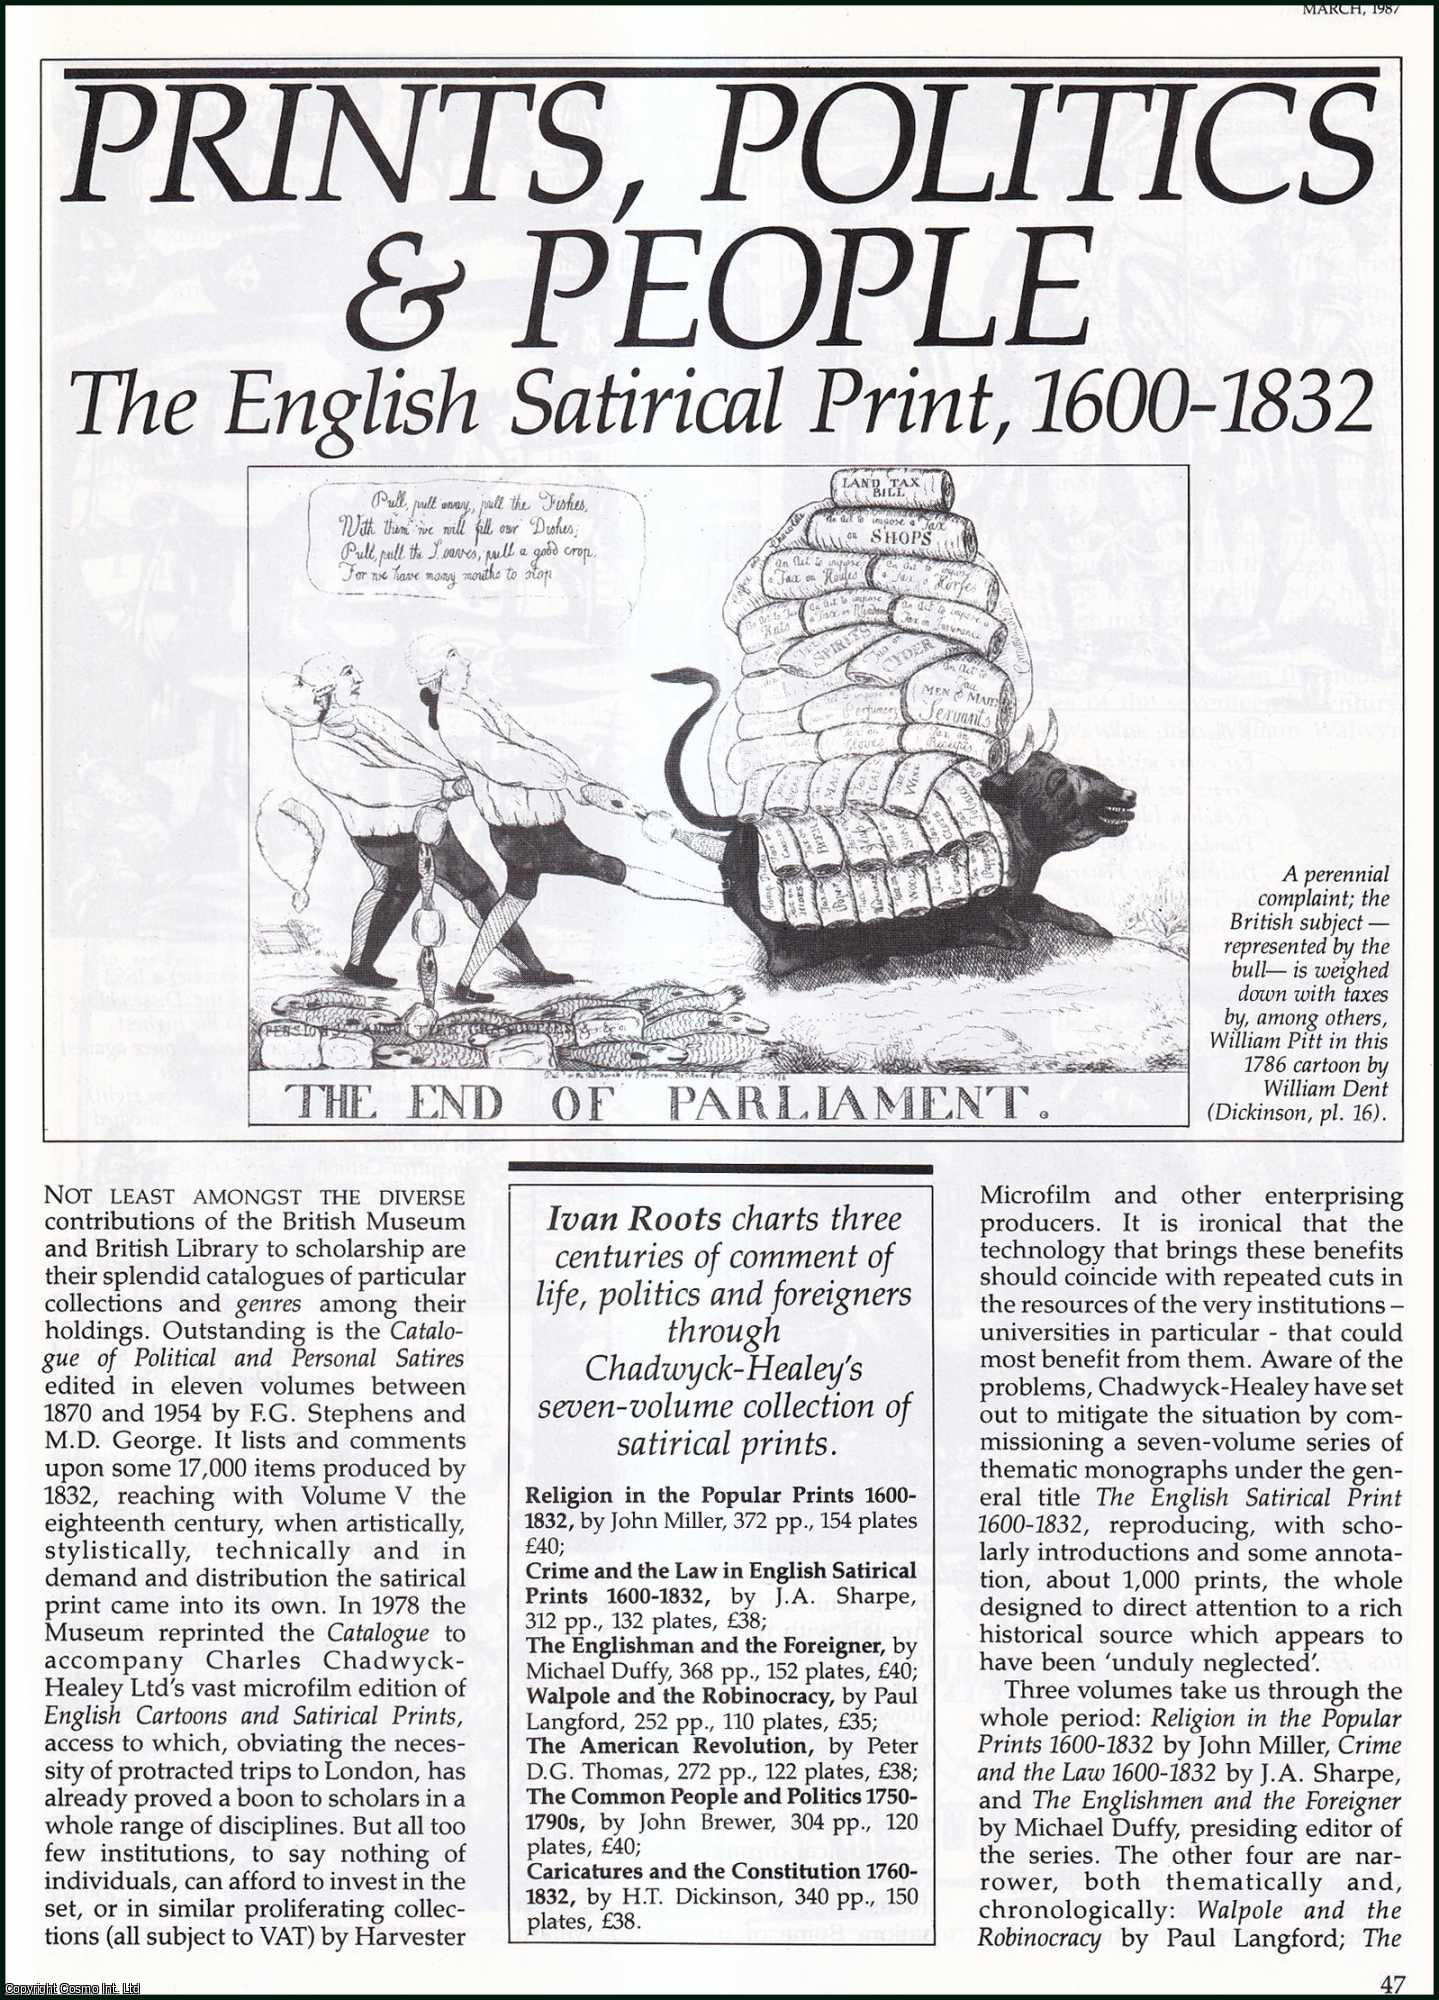 Ivan Roots - Prints, Politics and People: The English Satirical Print, 1600-1832. An original article from History Today, 1987.